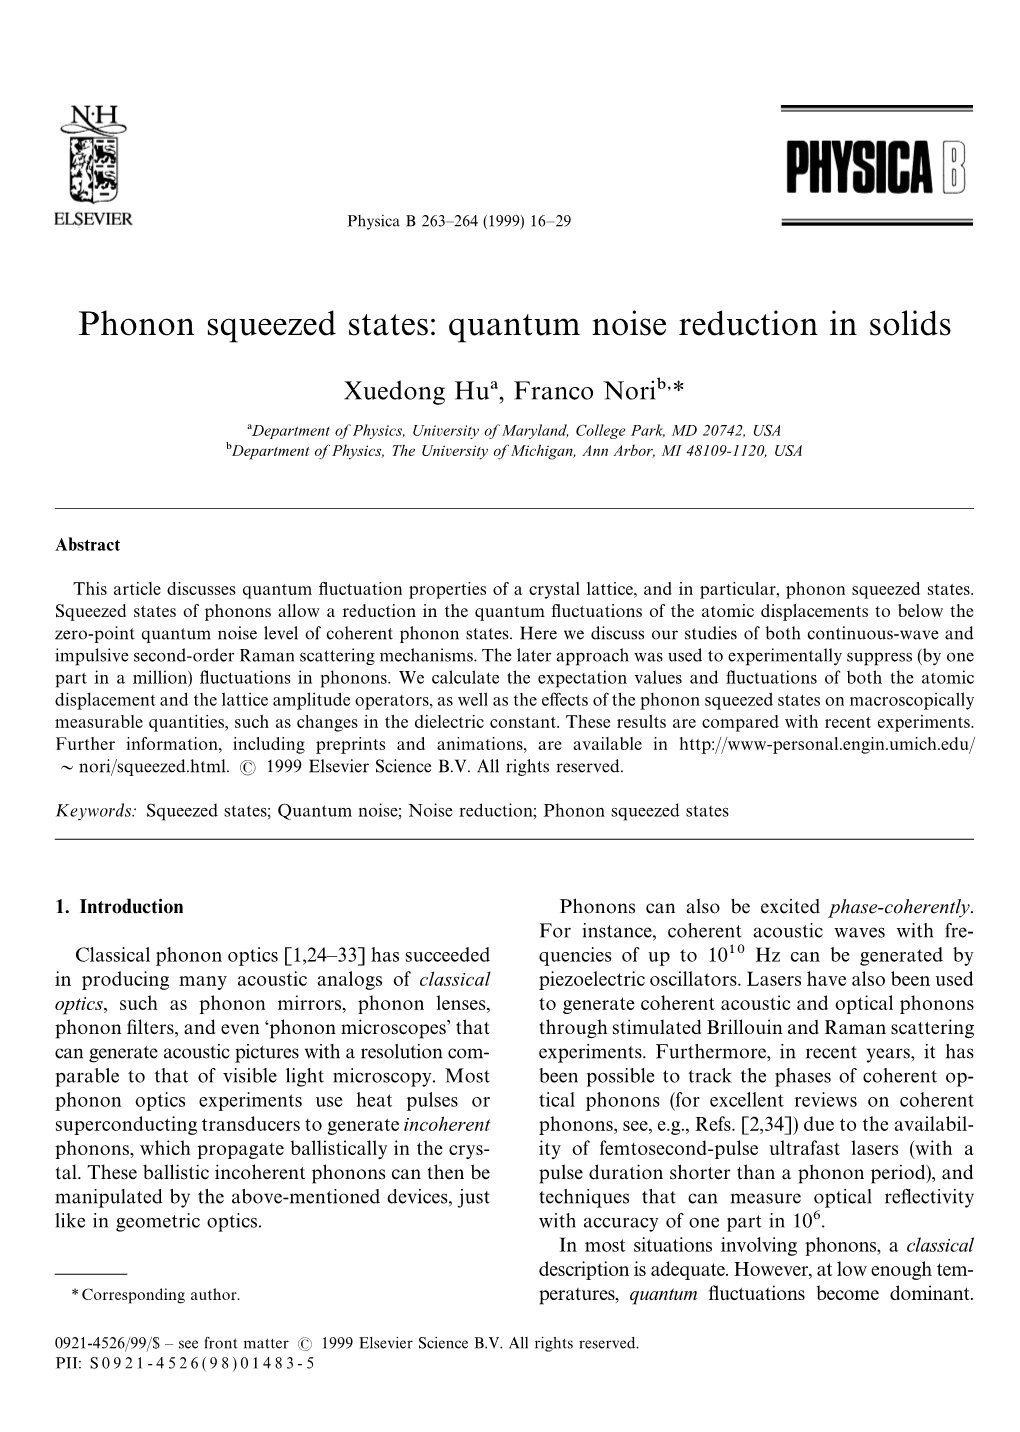 Phonon Squeezed States: Quantum Noise Reduction in Solids